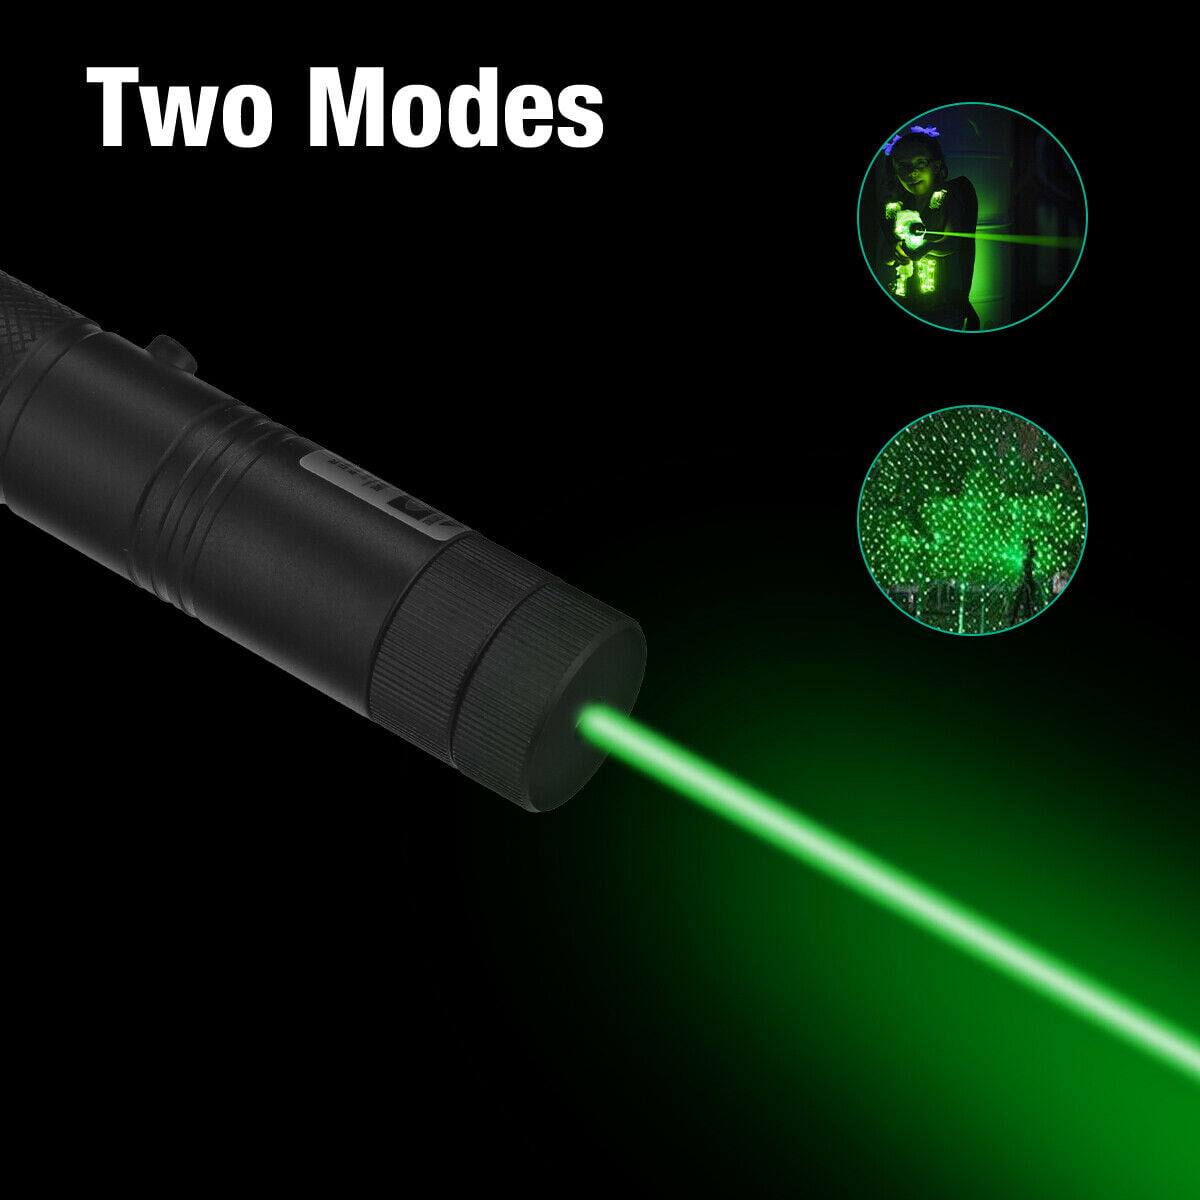 Details about   10PC 900Miles Green Laser Pointer Teaching AAA Lazer Single Point Visible Beam 